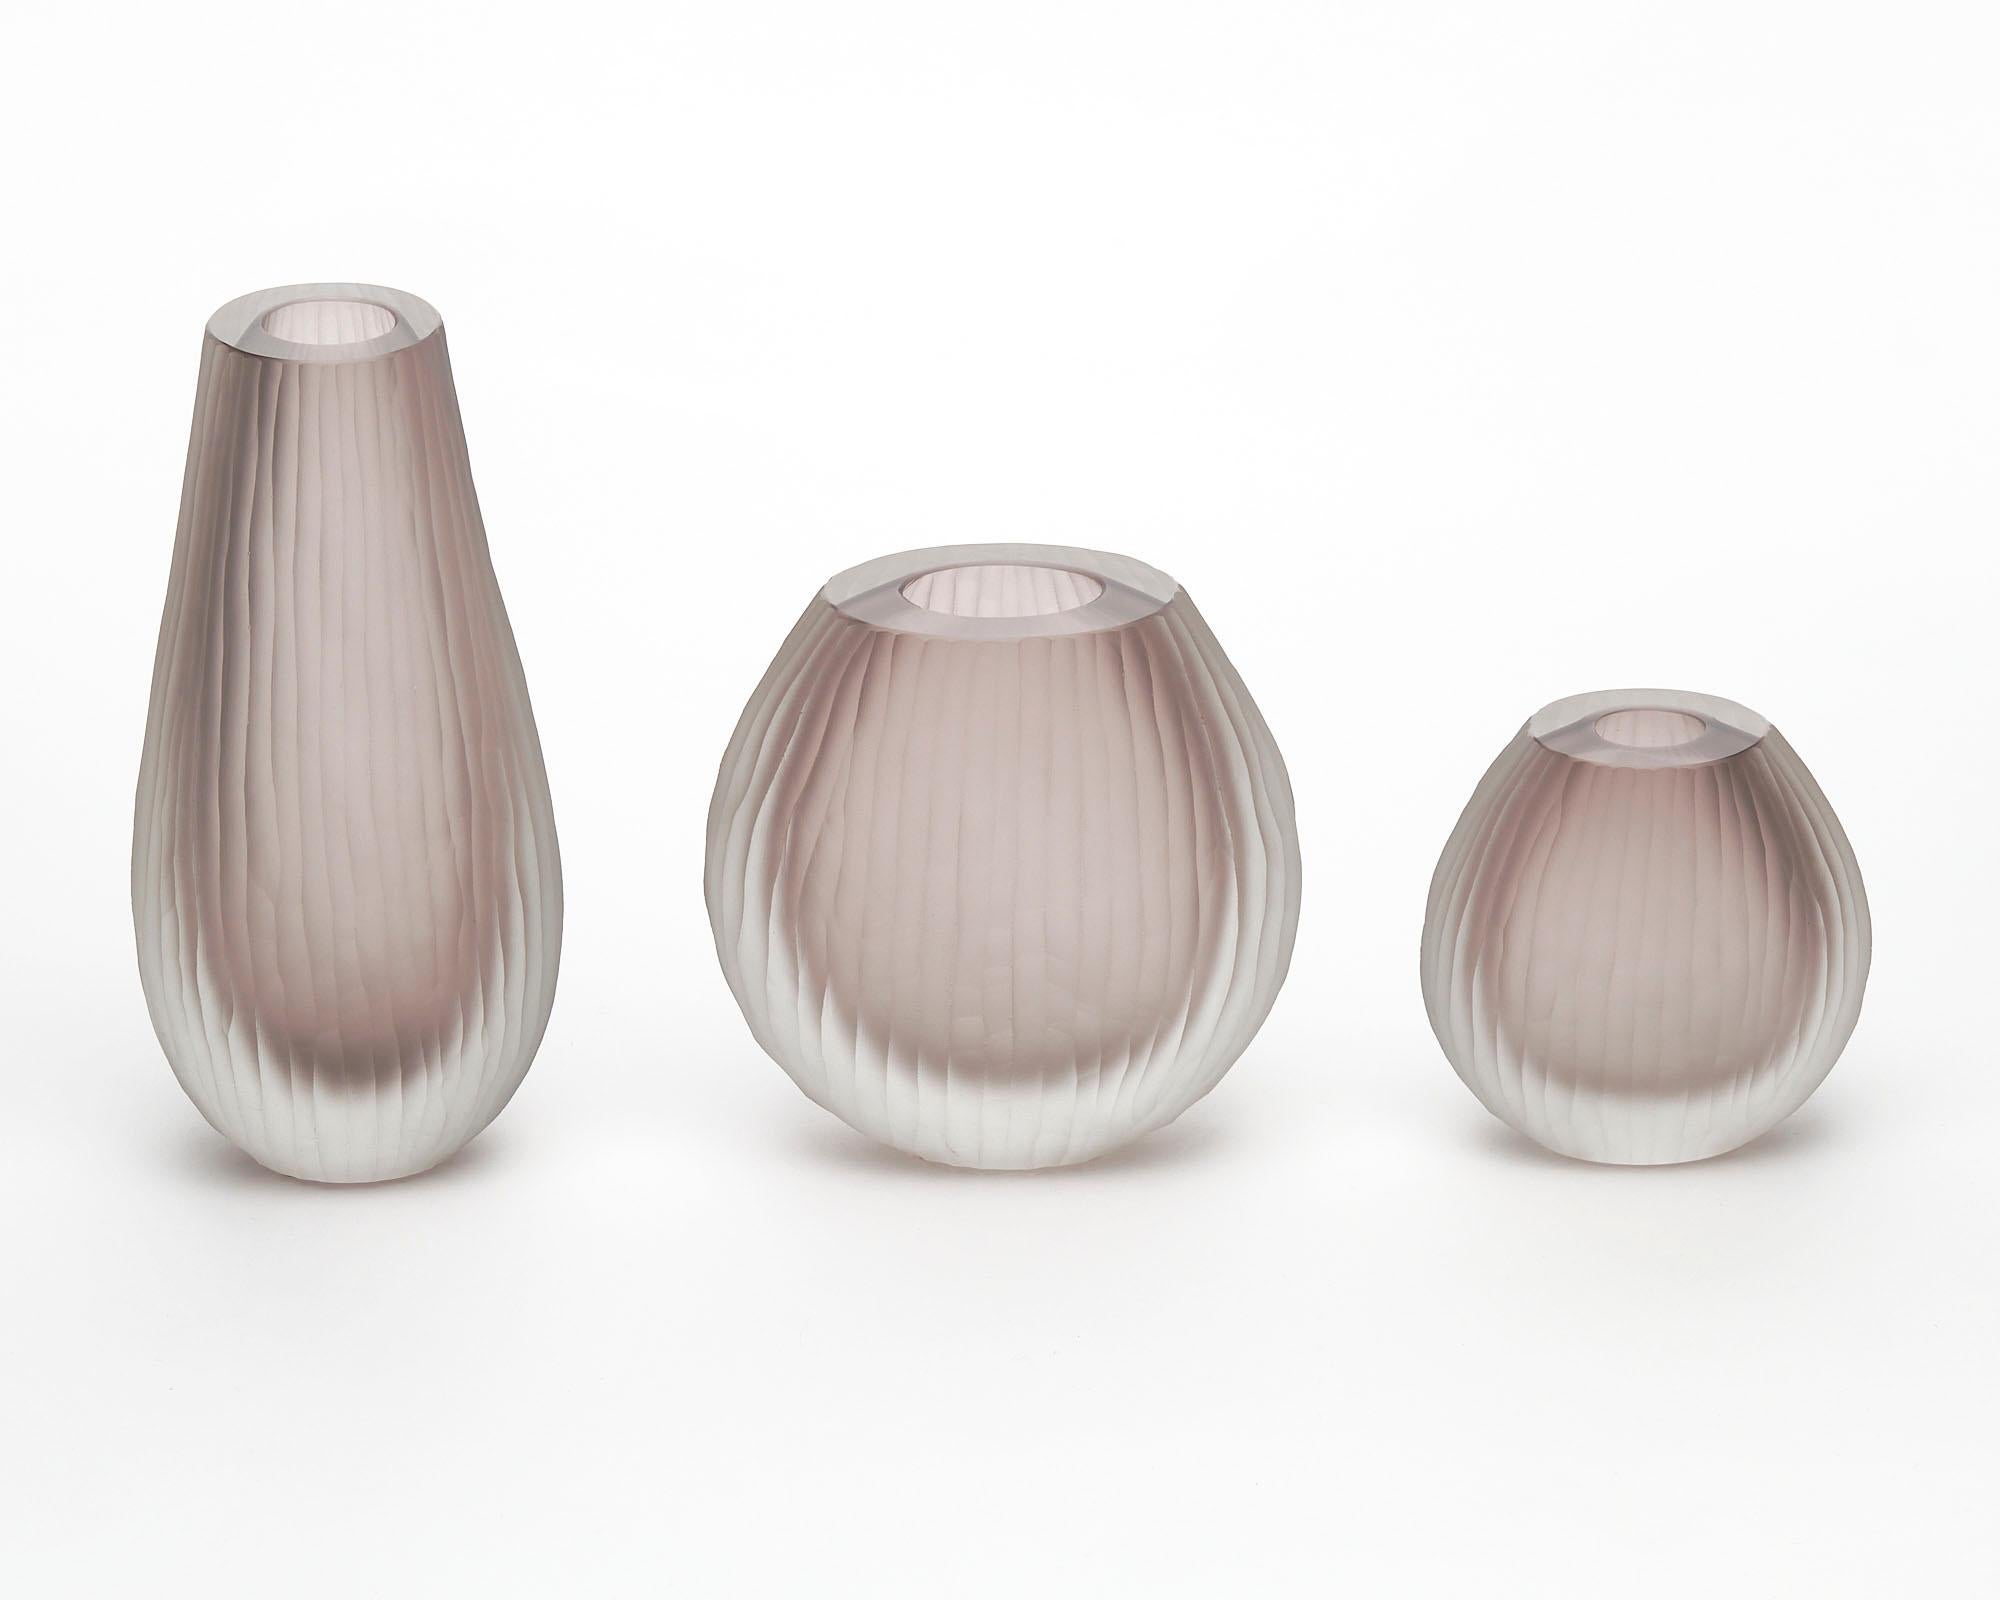 Vase trio made of hand-blown glass from the island of Murano outside of Venice, Italy. The set has been made using the “battuto” or hammered technique. They are in a lovely light amethyst colored glass. The measurements listed are for the tallest